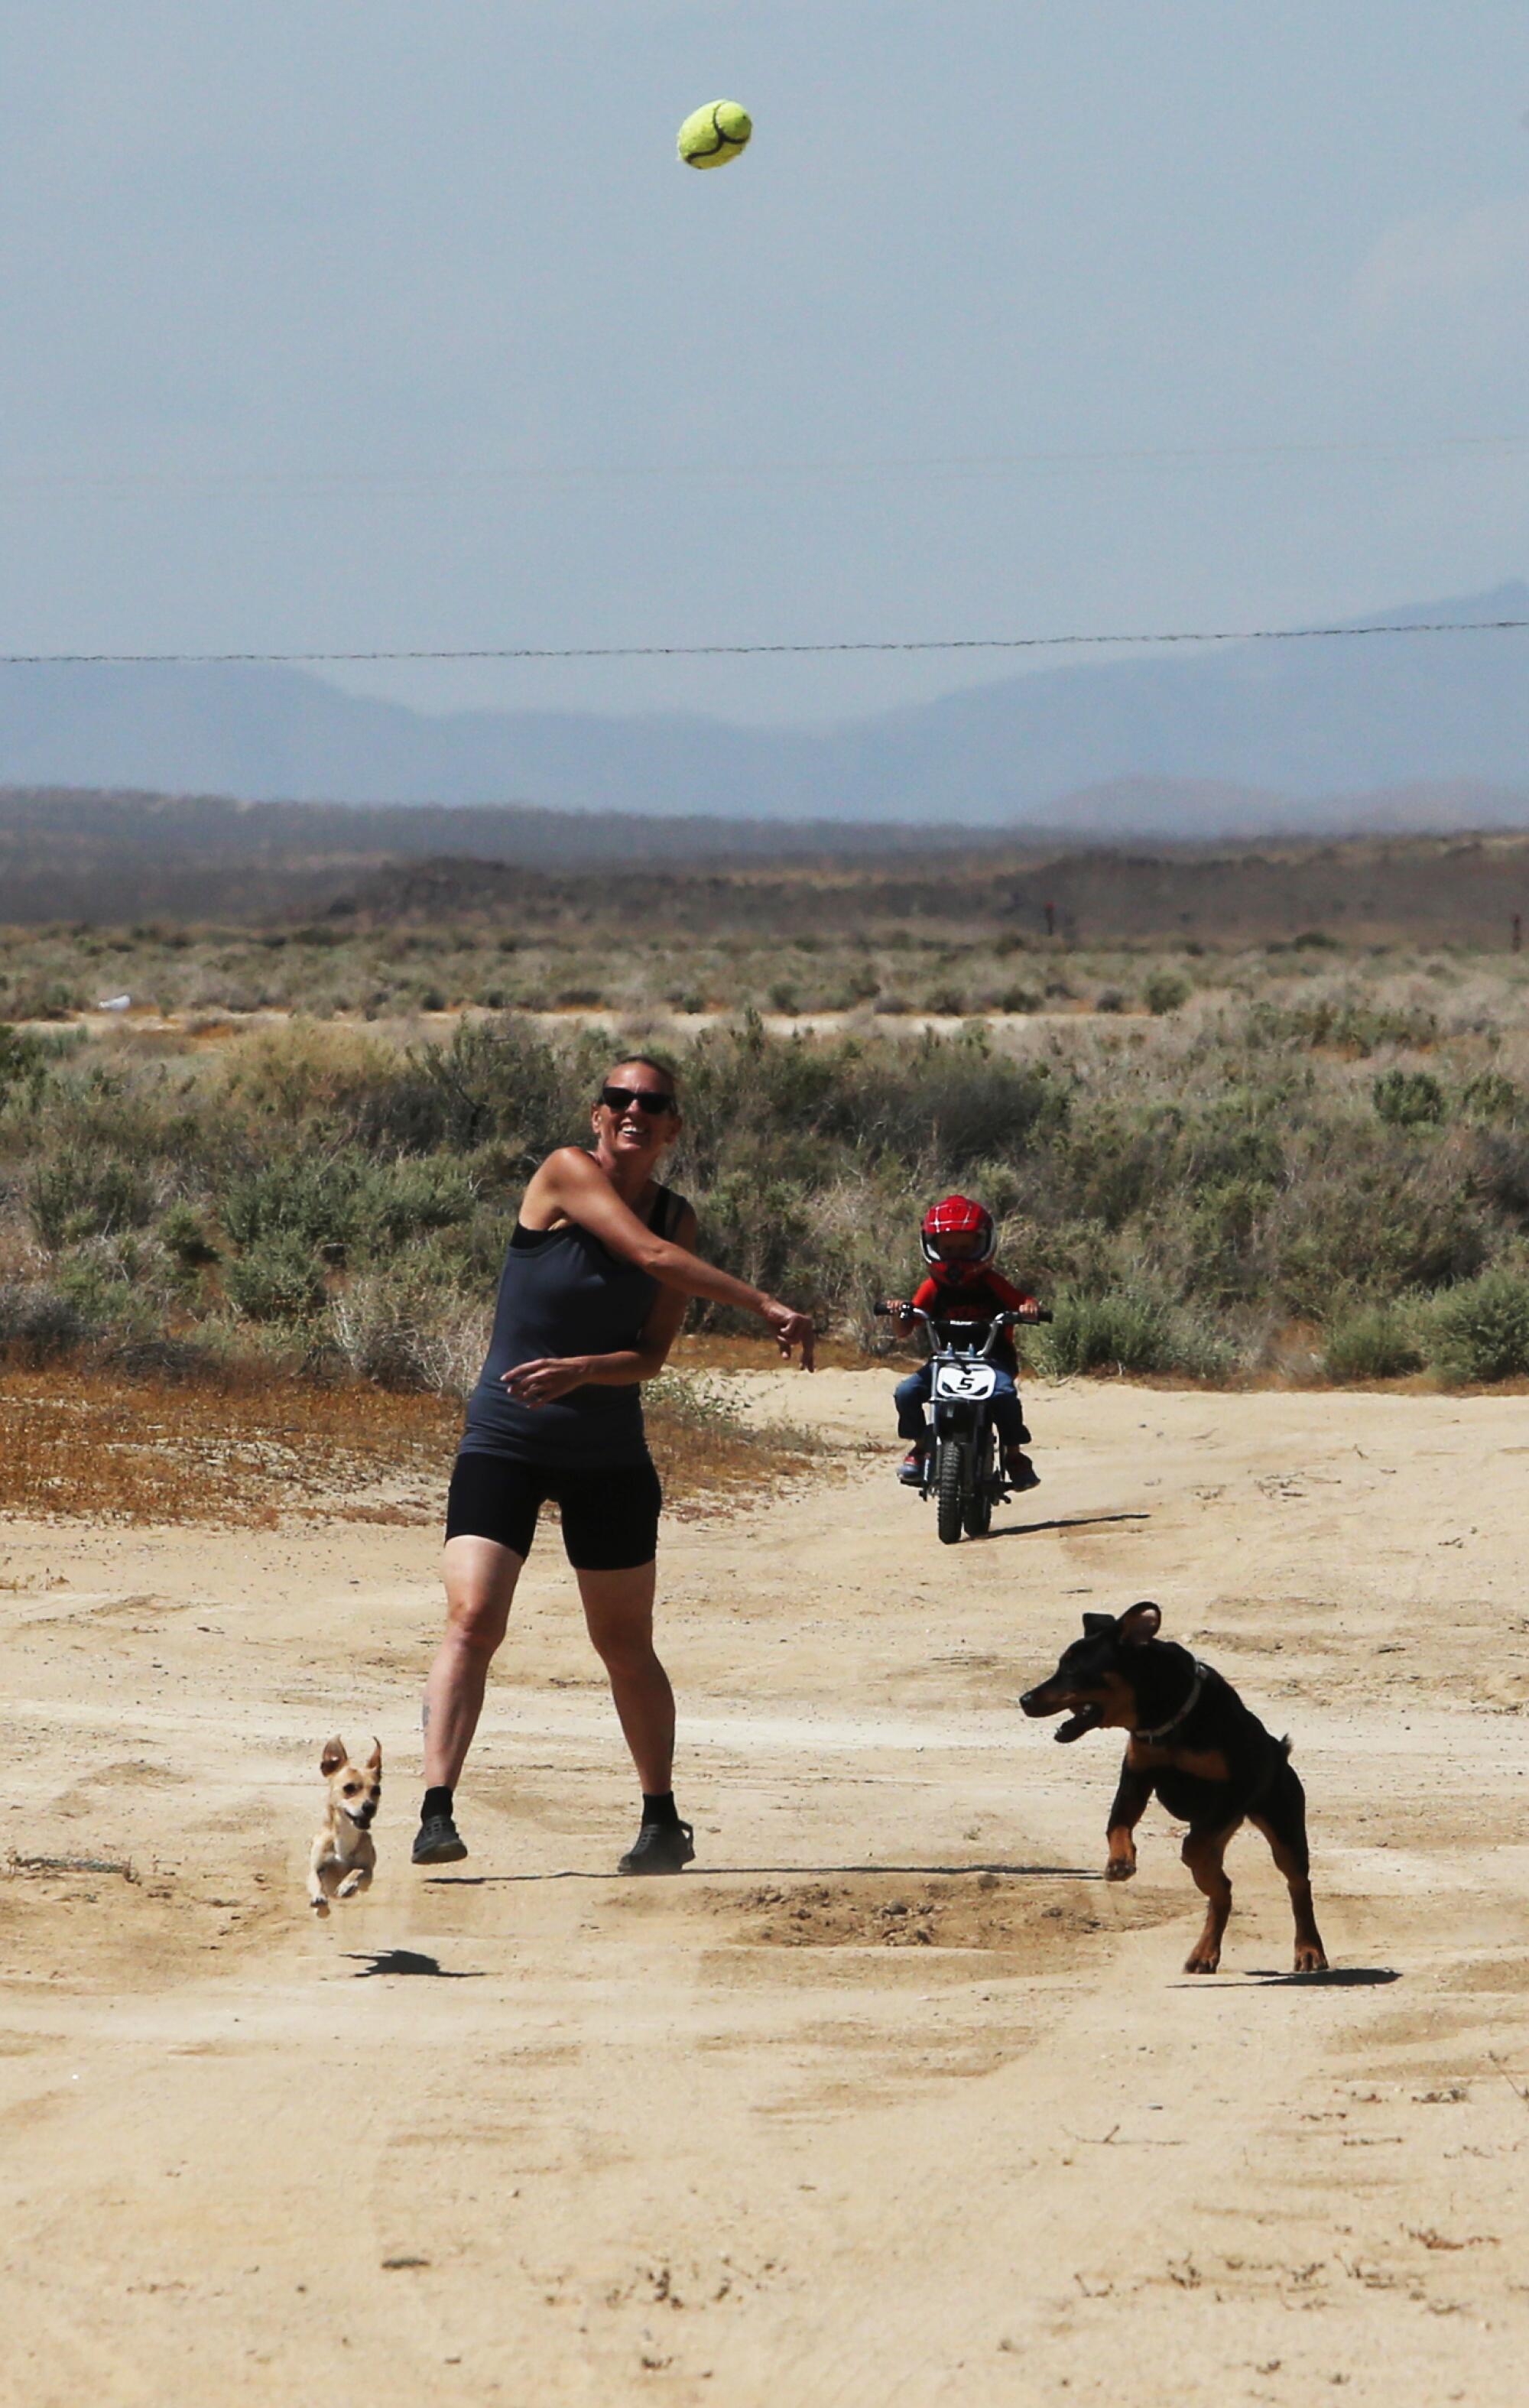 A woman, two dogs and a boy on a bicycle play in a desert landscape.